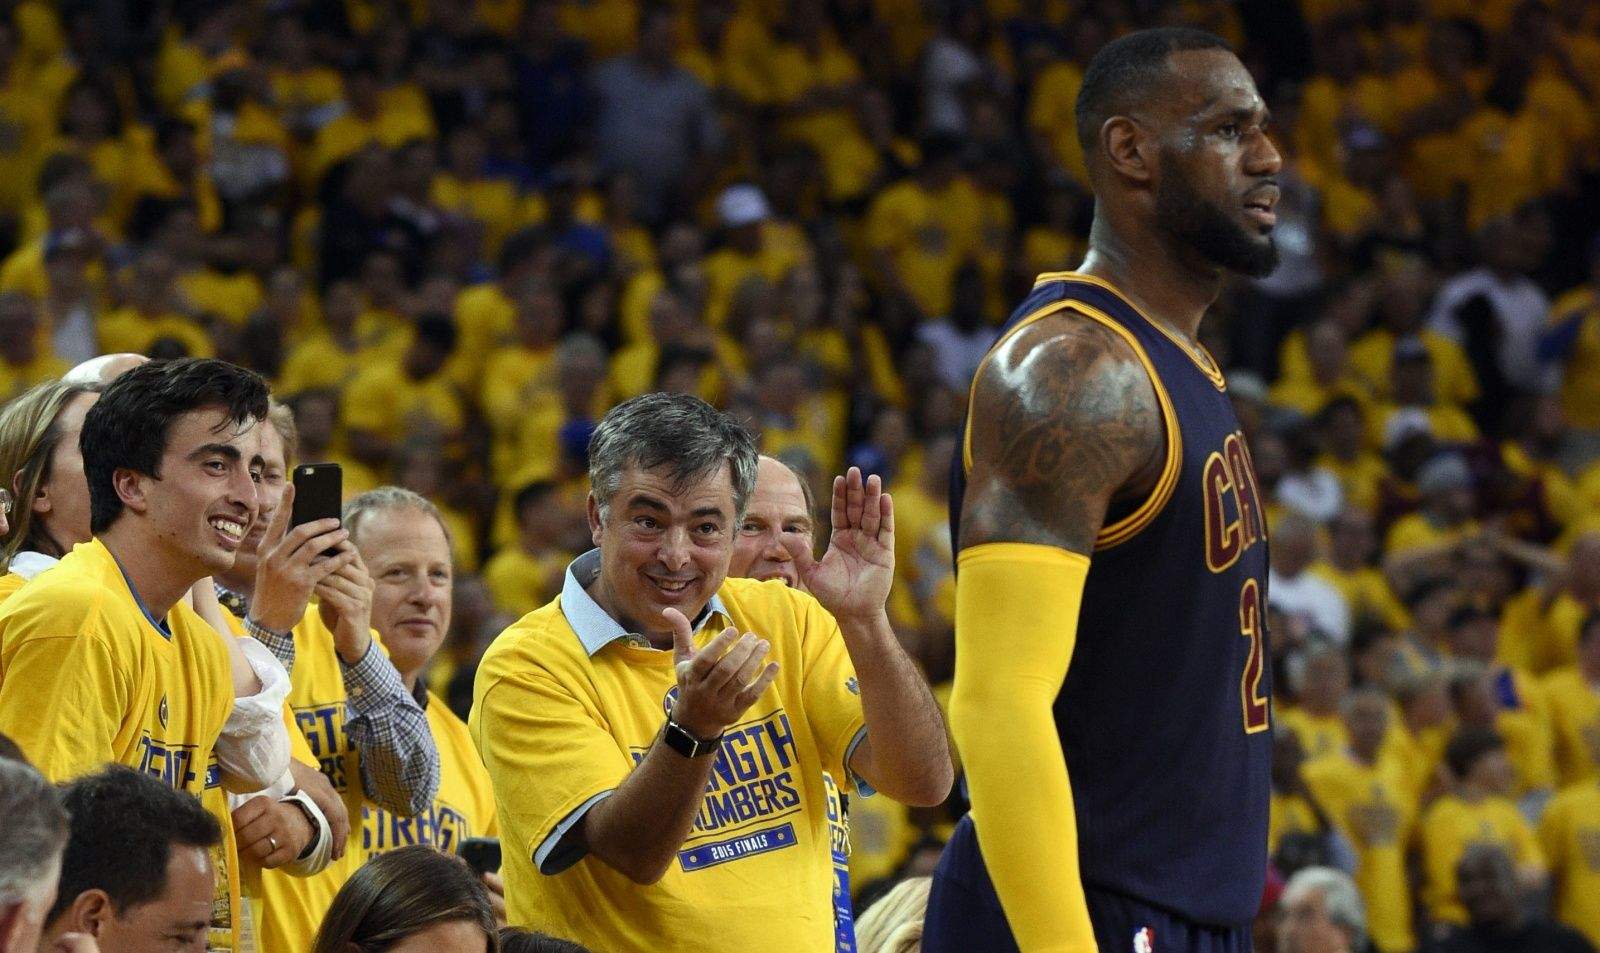 Eddy Cue isn't cheering for Lebron this year.